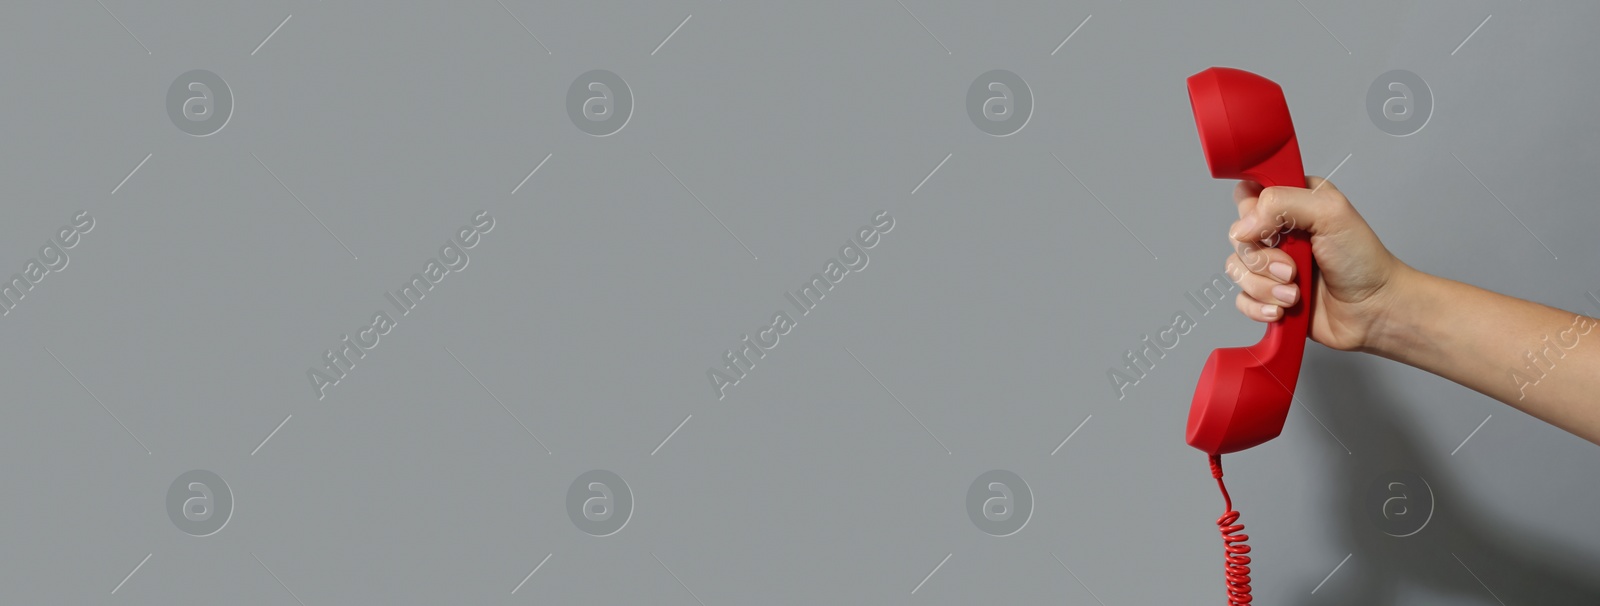 Image of Hotline service. Woman with telephone receiver and space for text on grey background, banner design